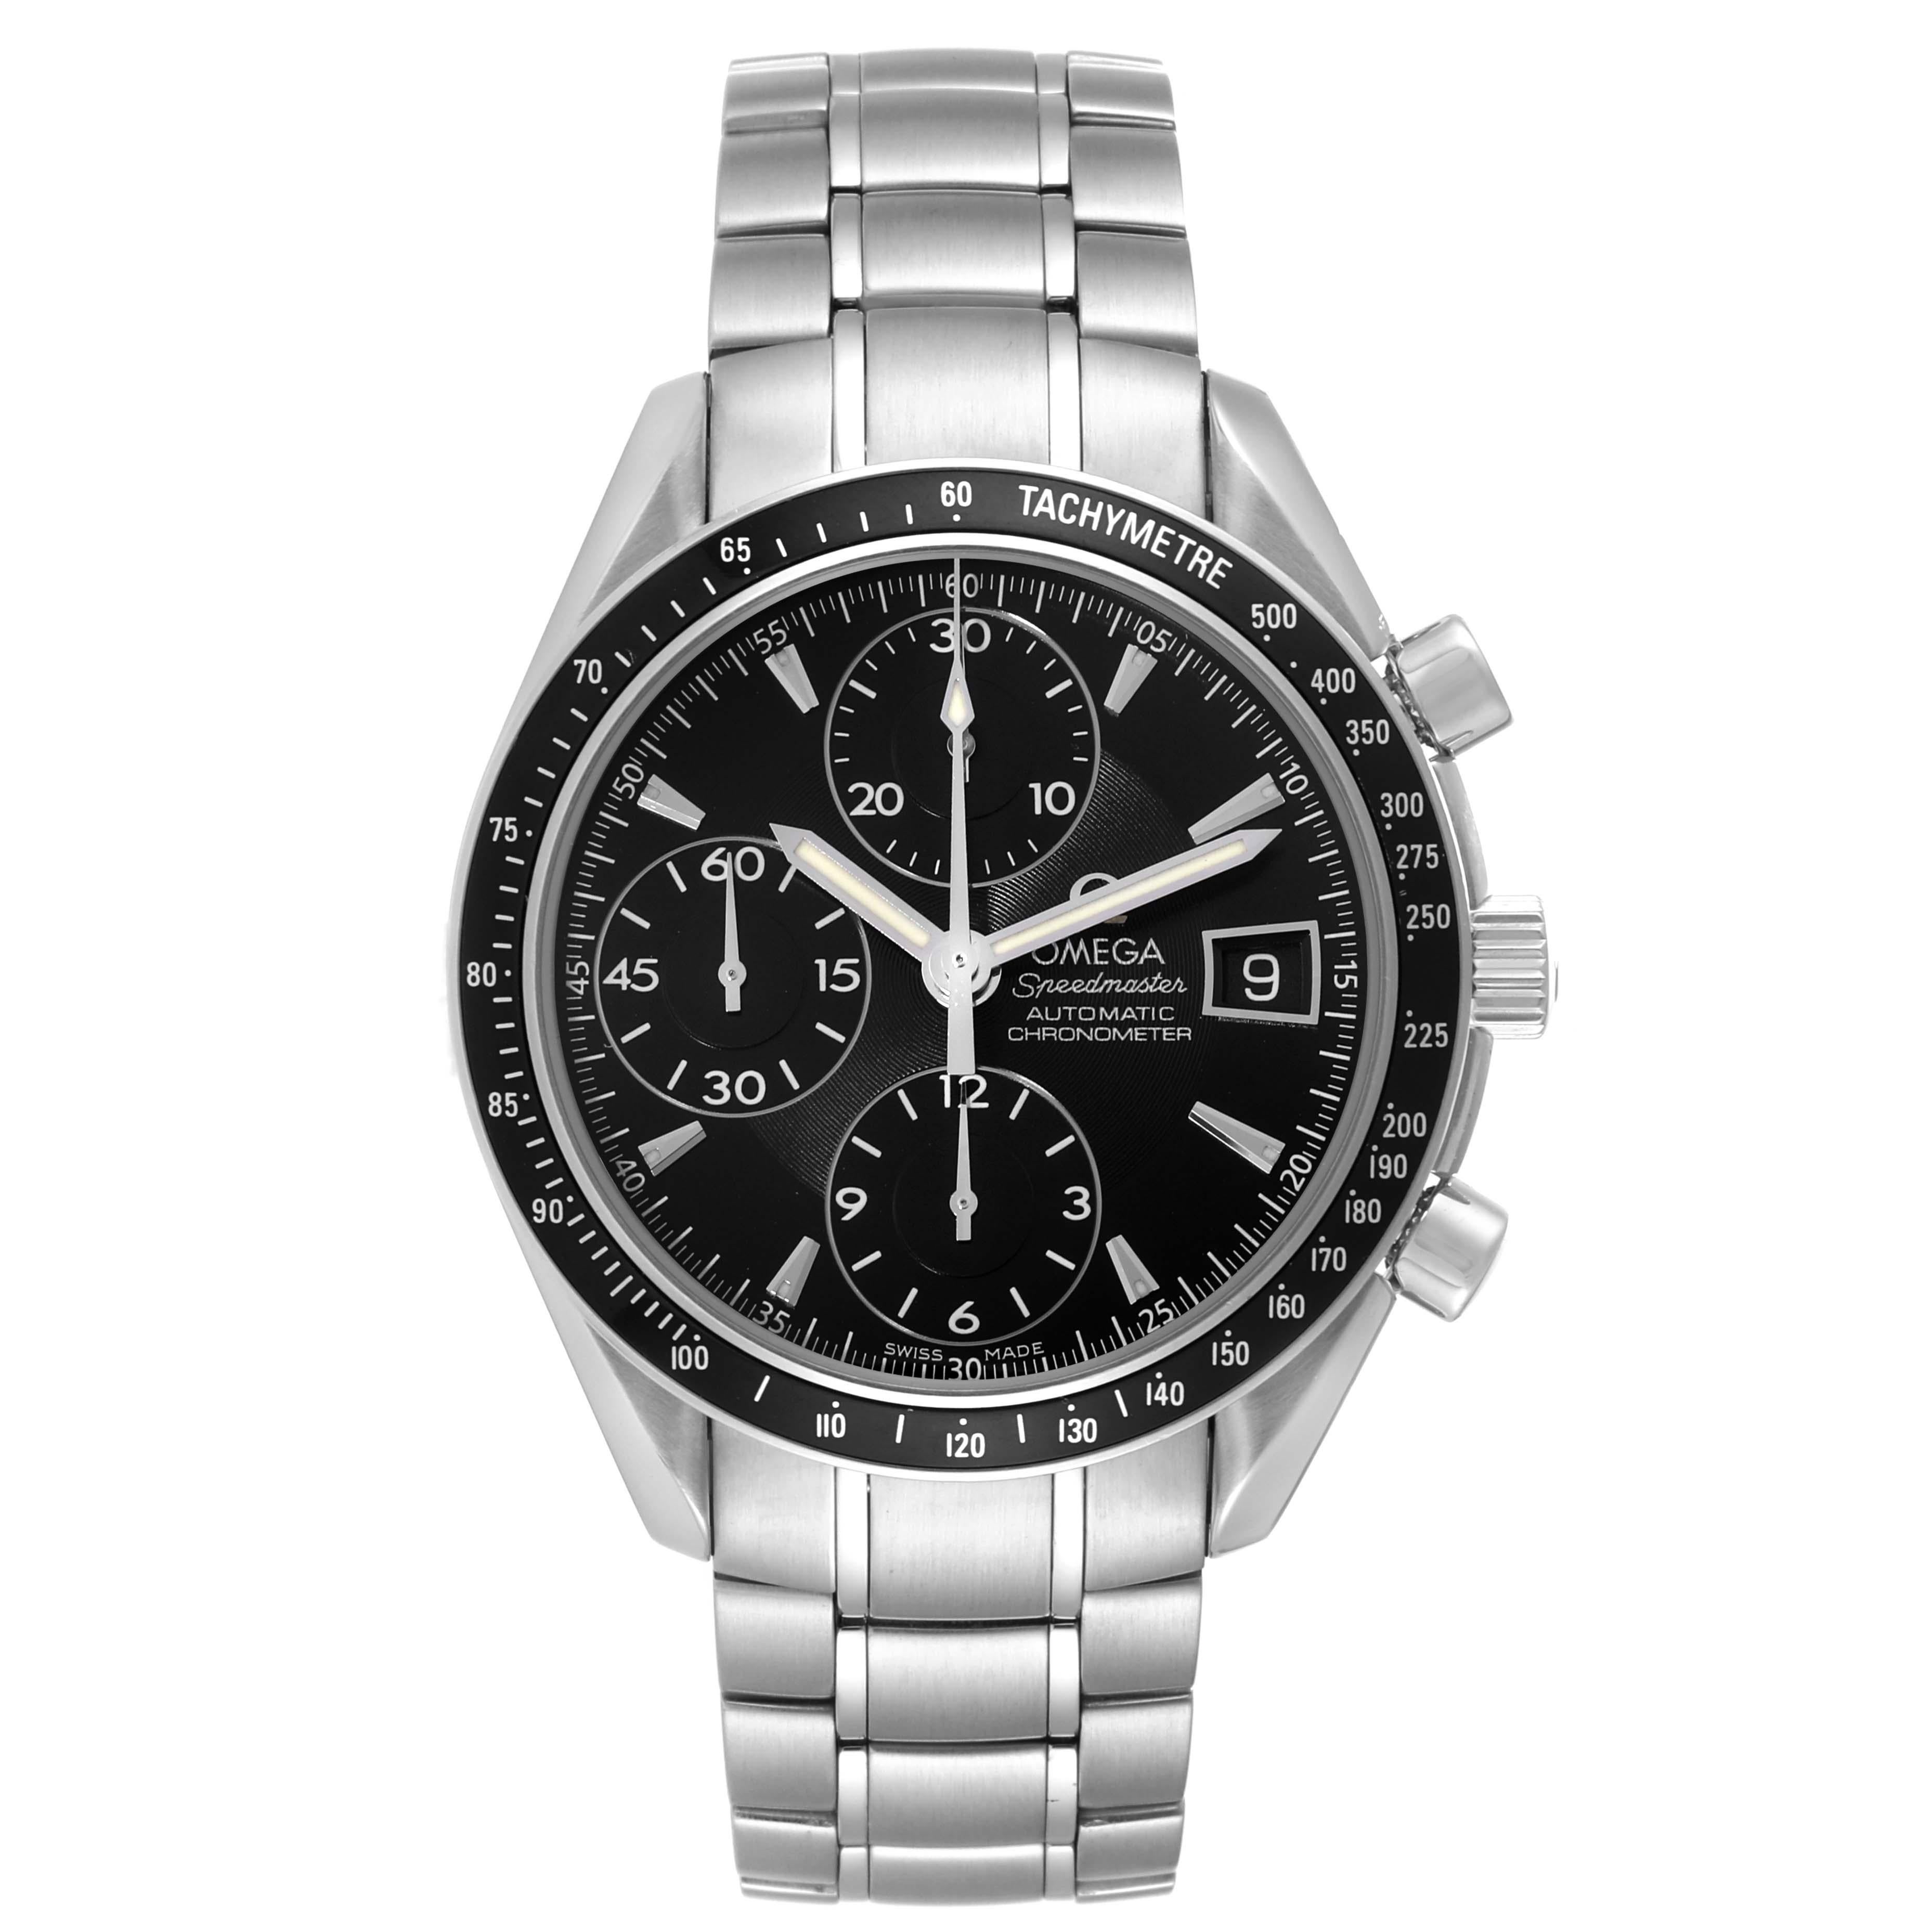 Omega Speedmaster Date Black Dial Steel Mens Watch 3210.50.00 Box Card. Automatic self-winding chronograph movement. Stainless steel round case 40.0 mm in diameter. Black bezel with tachymeter function. Scratch-resistant sapphire crystal with